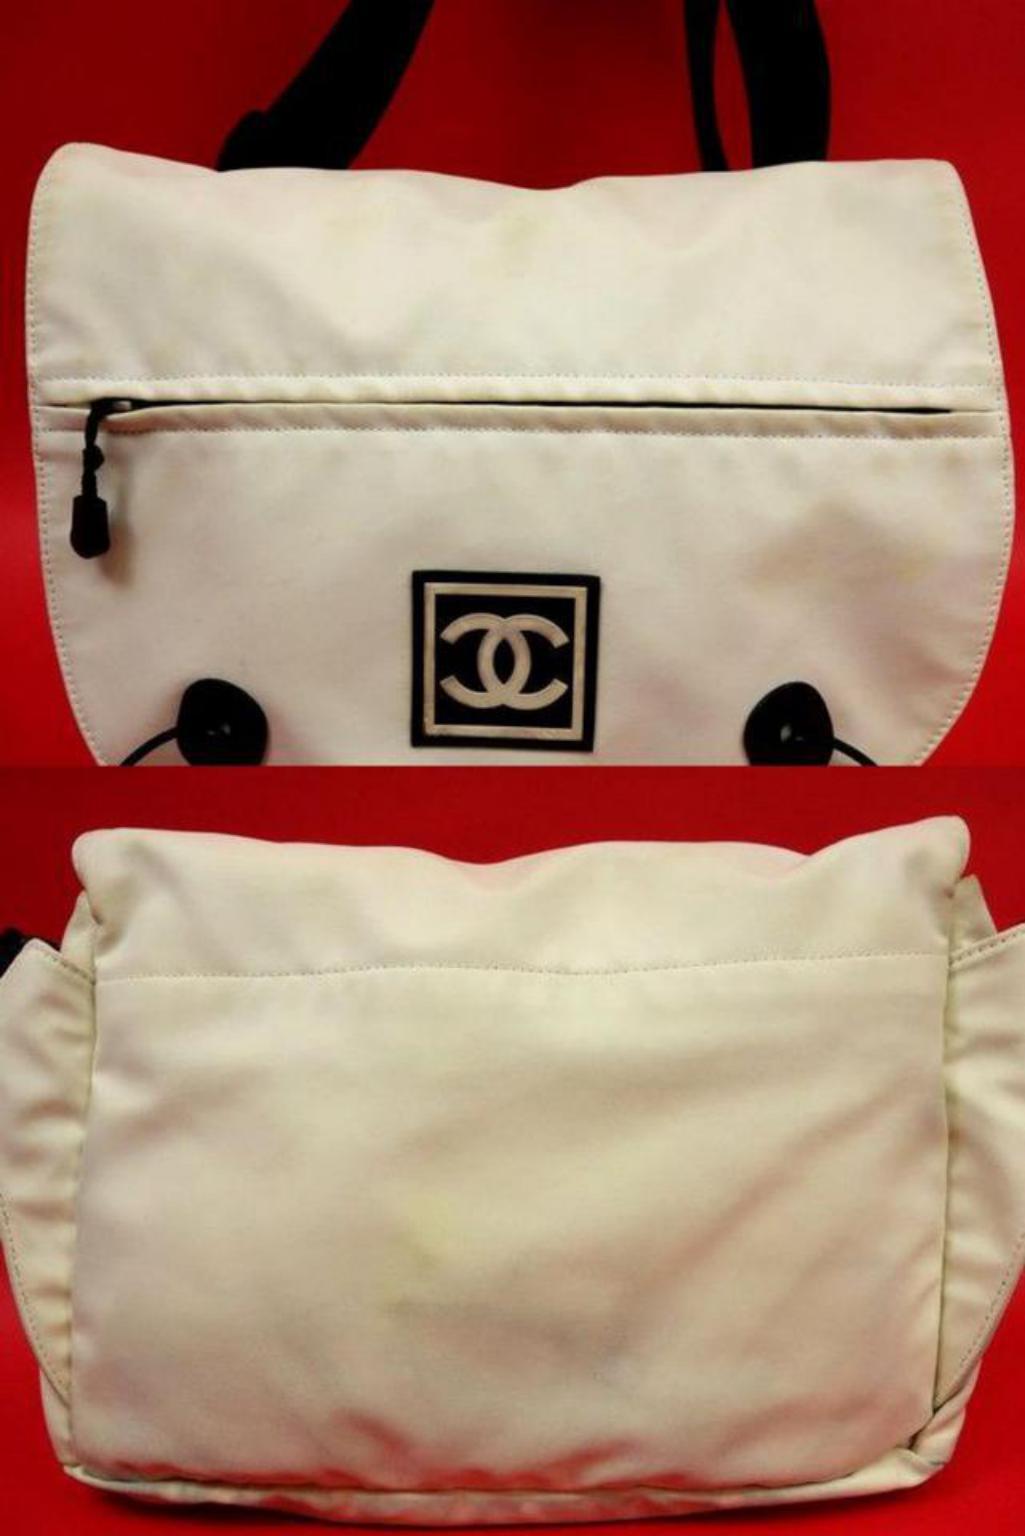 Chanel Messenger Large Cc Sports 225347 White X Black Canvas Messenger Bag In Good Condition For Sale In Forest Hills, NY